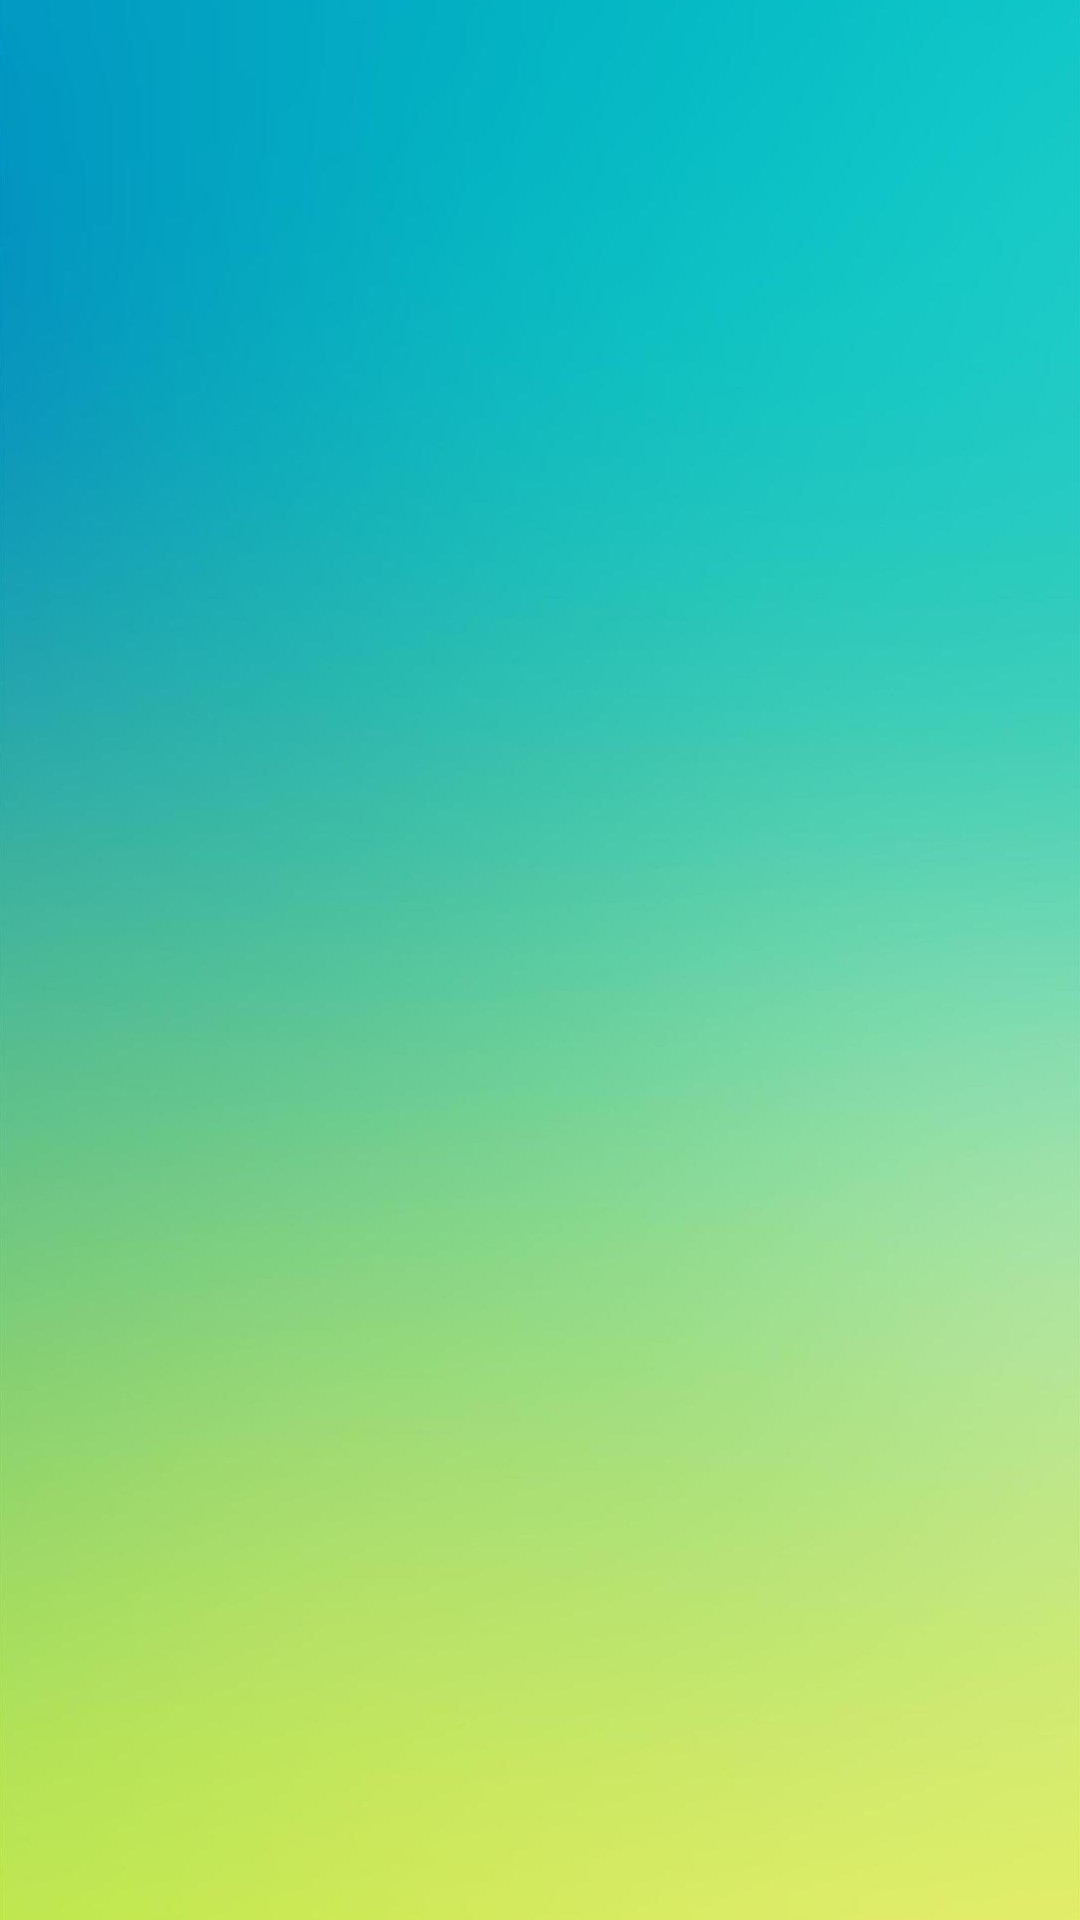 Simple Backgrounds Galaxy S4 Wallpapers hd